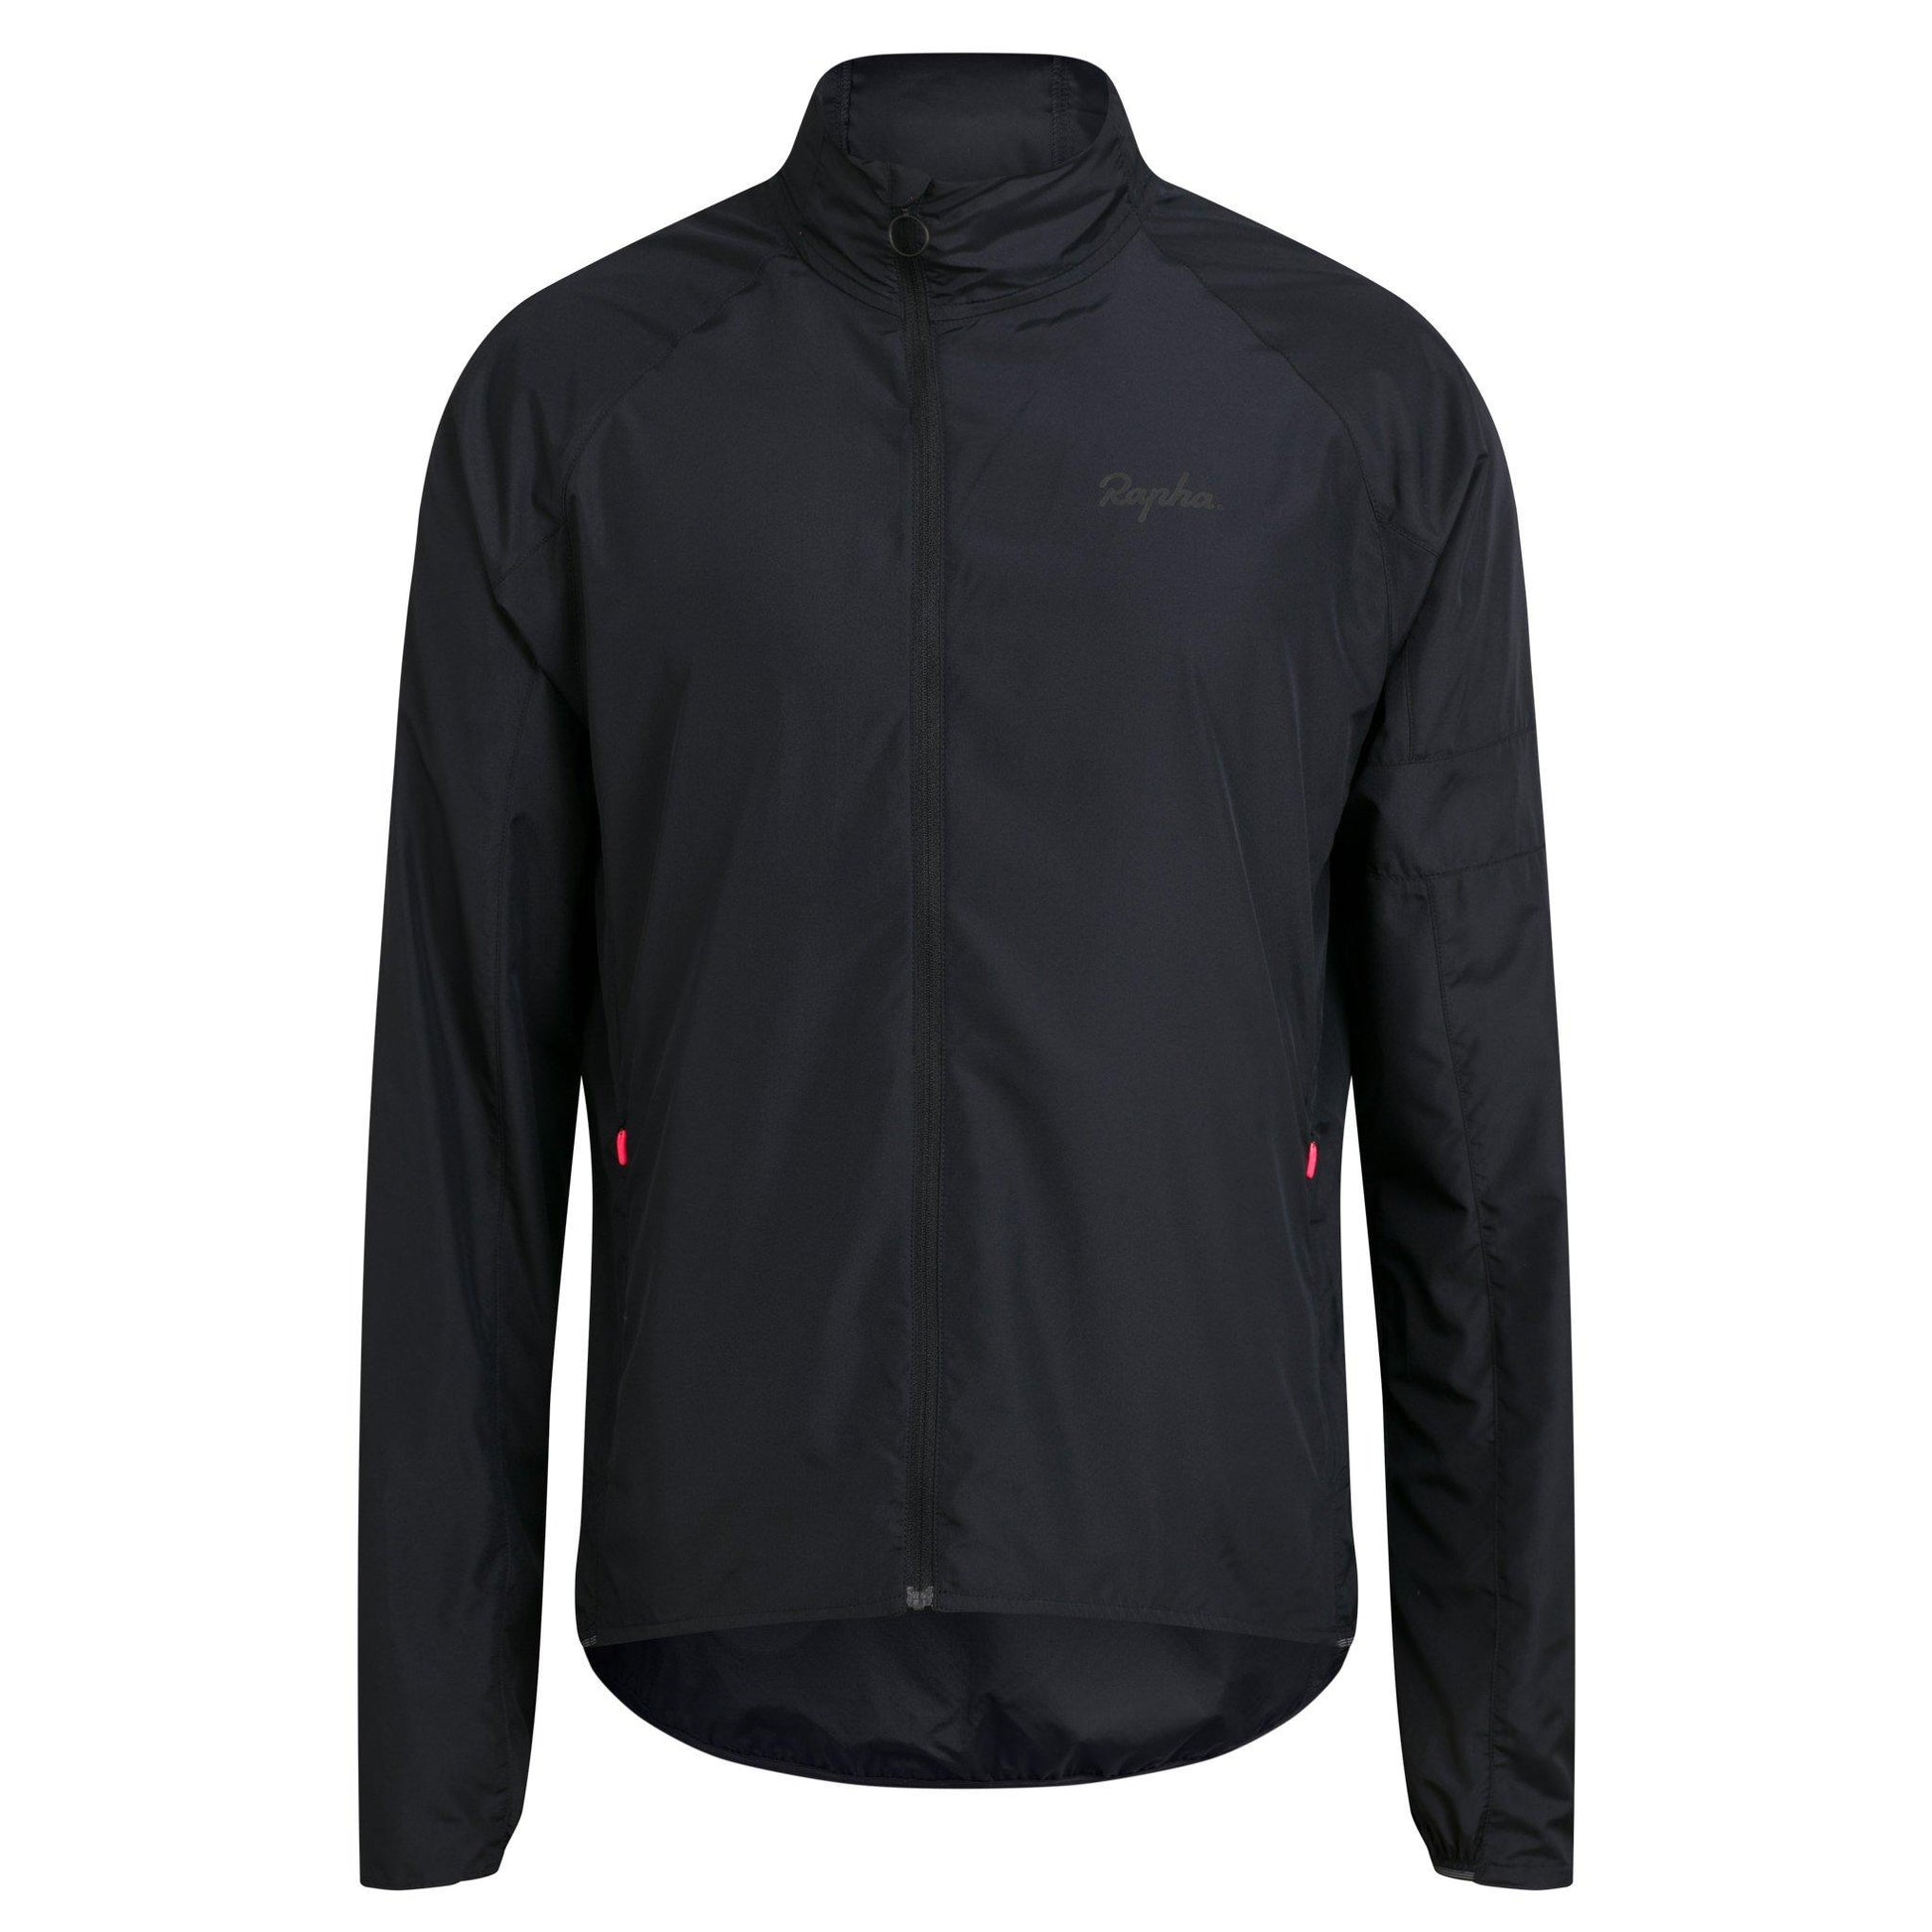 Rapha Mens Commuter Lightweight Jacket, Black buy now at Woolys Wheels Sydney with Free Delivery!